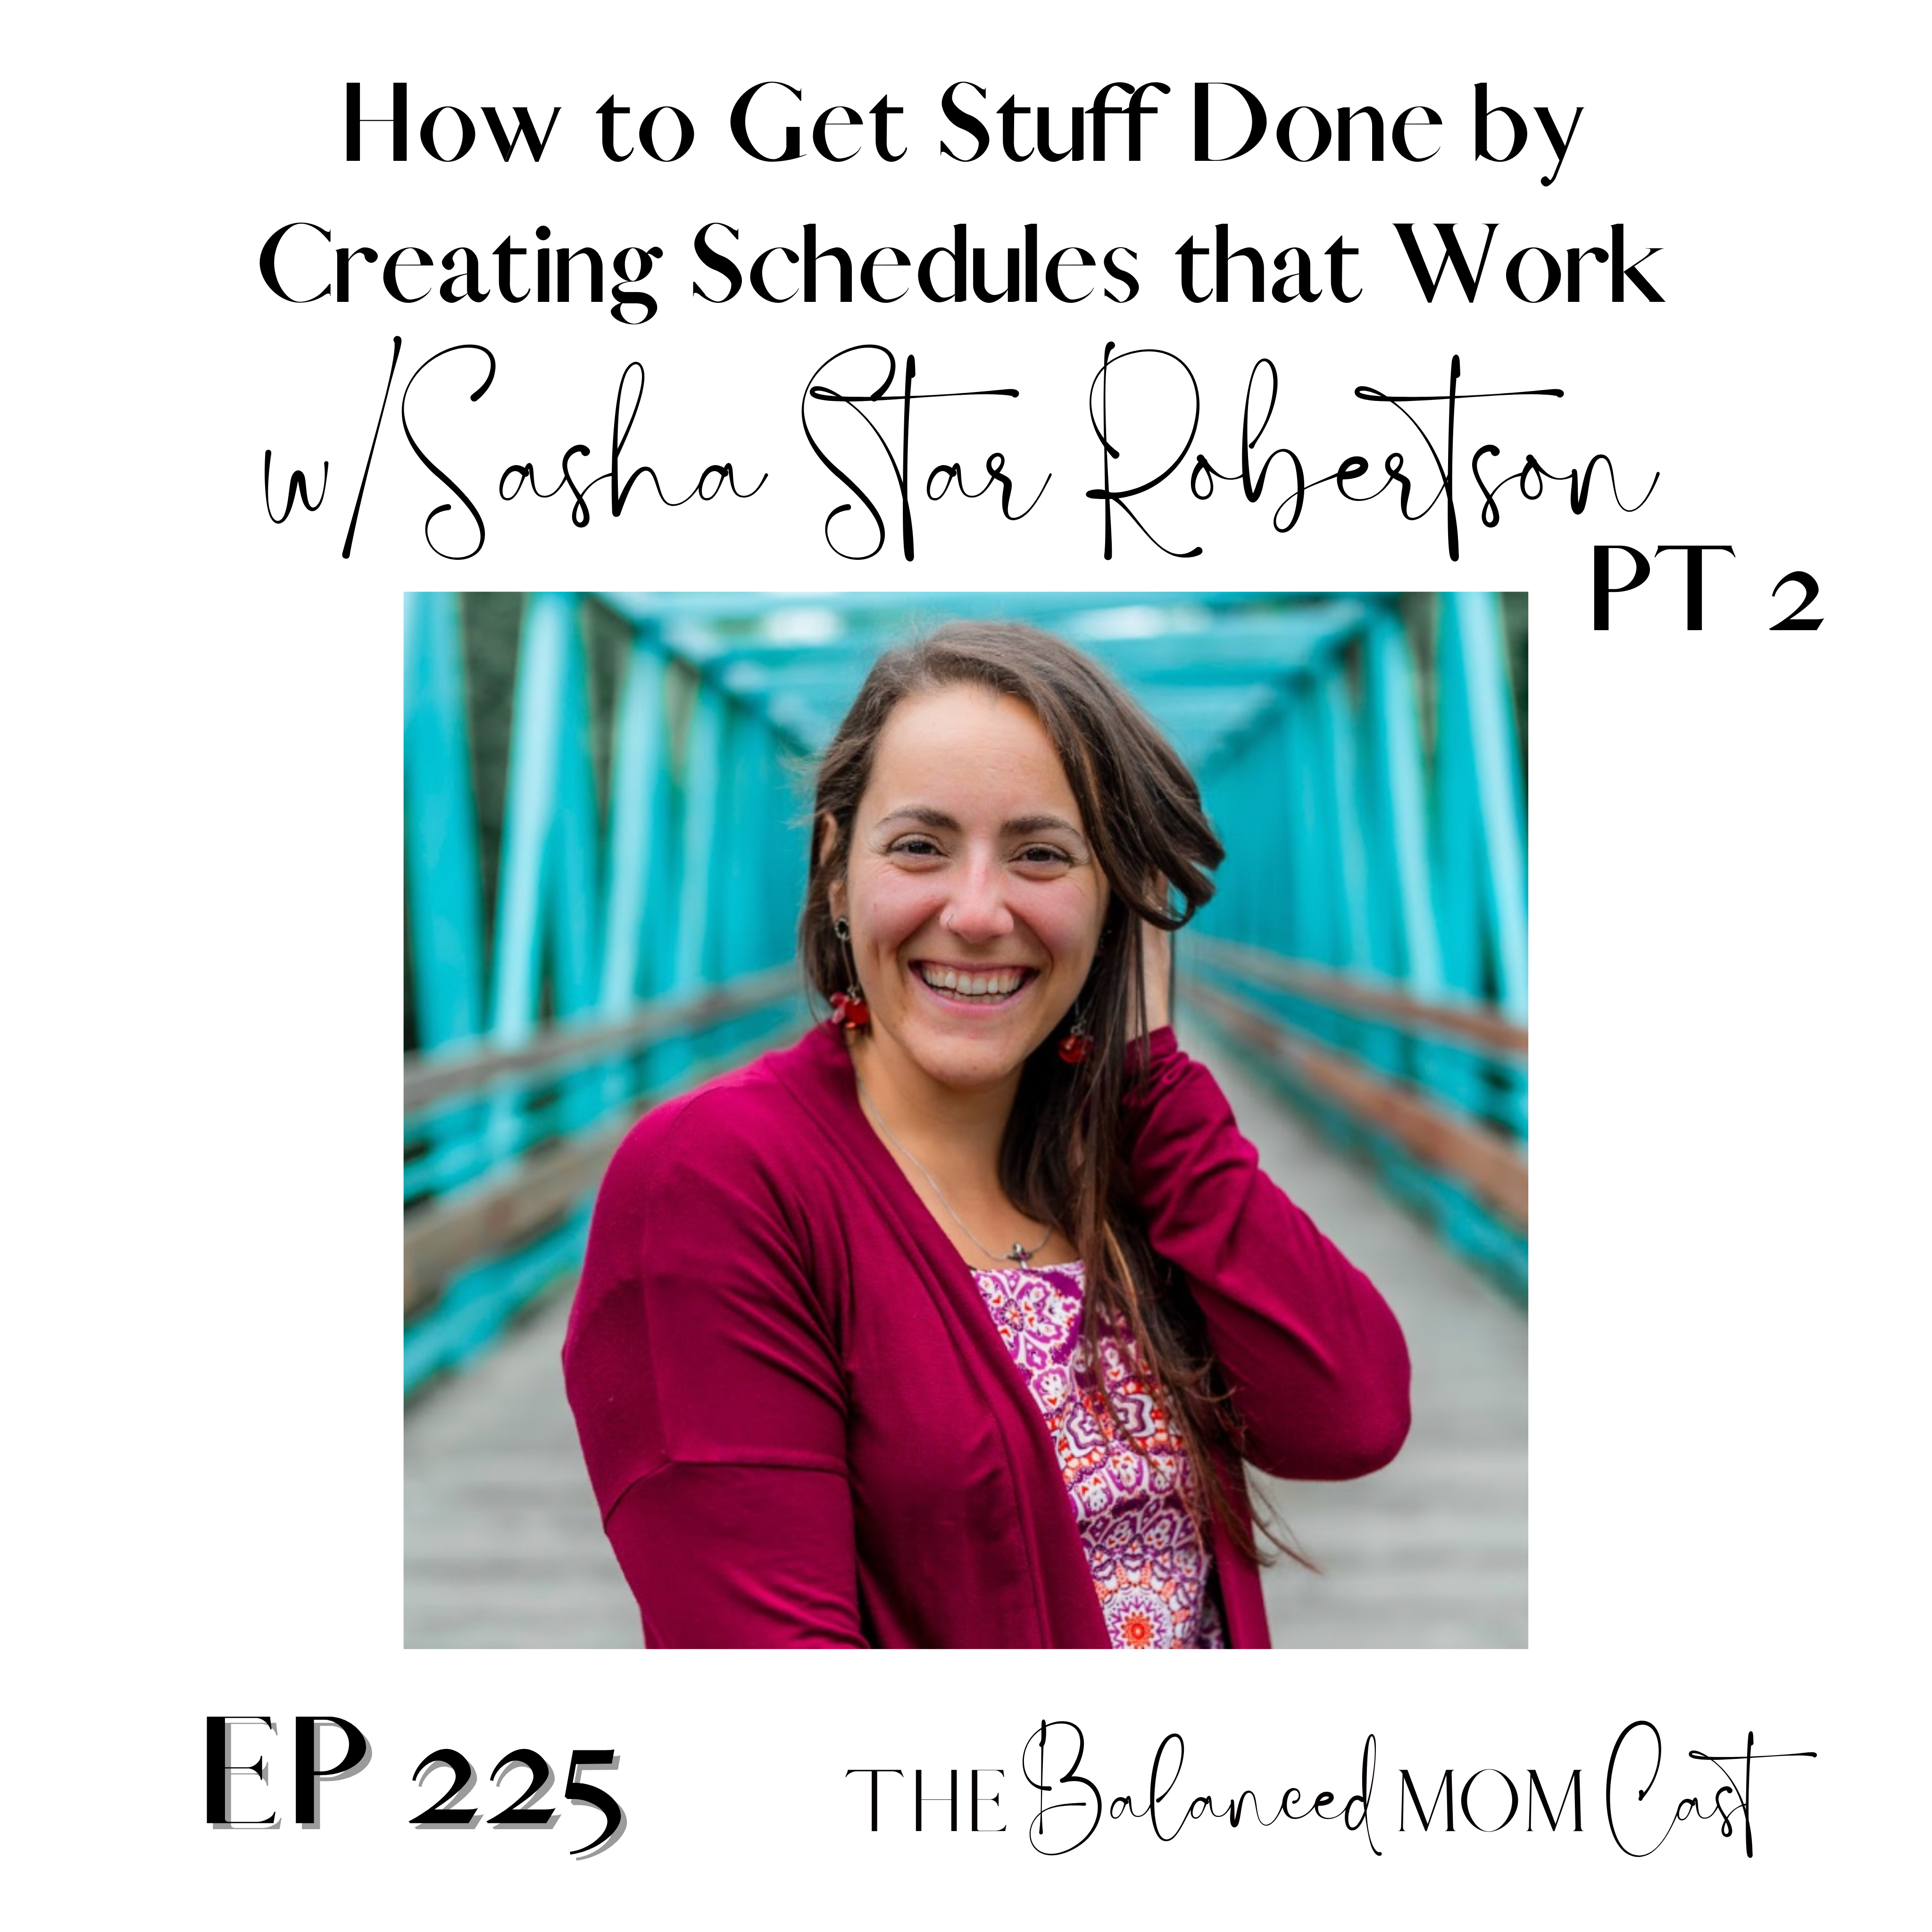 Ep 225: How to Get Stuff Done by Creating Schedules that Work w/Sasha Star Robertson, Part 2